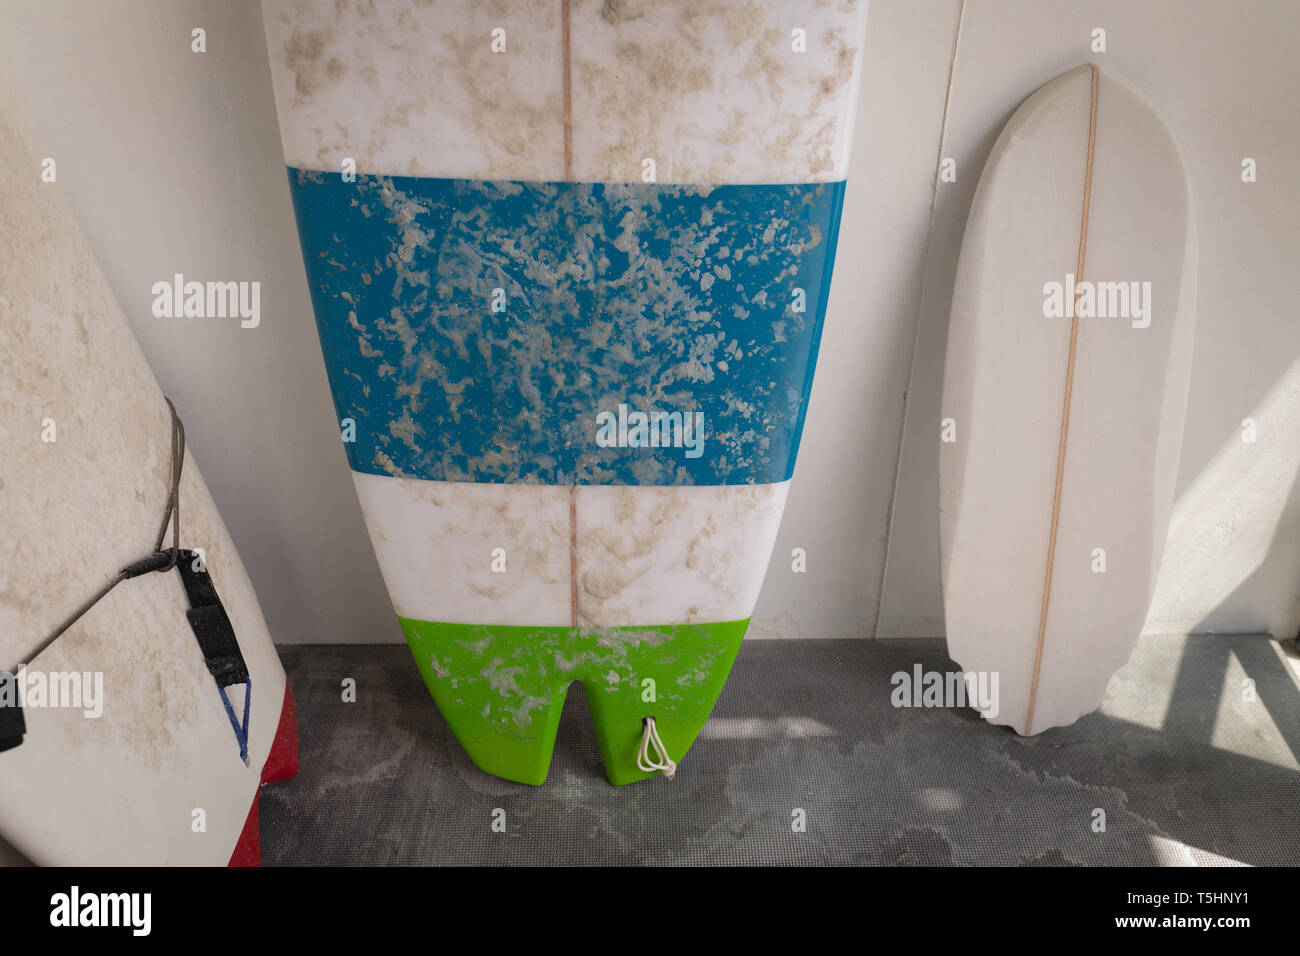 Surfboards in a shop Stock Photo